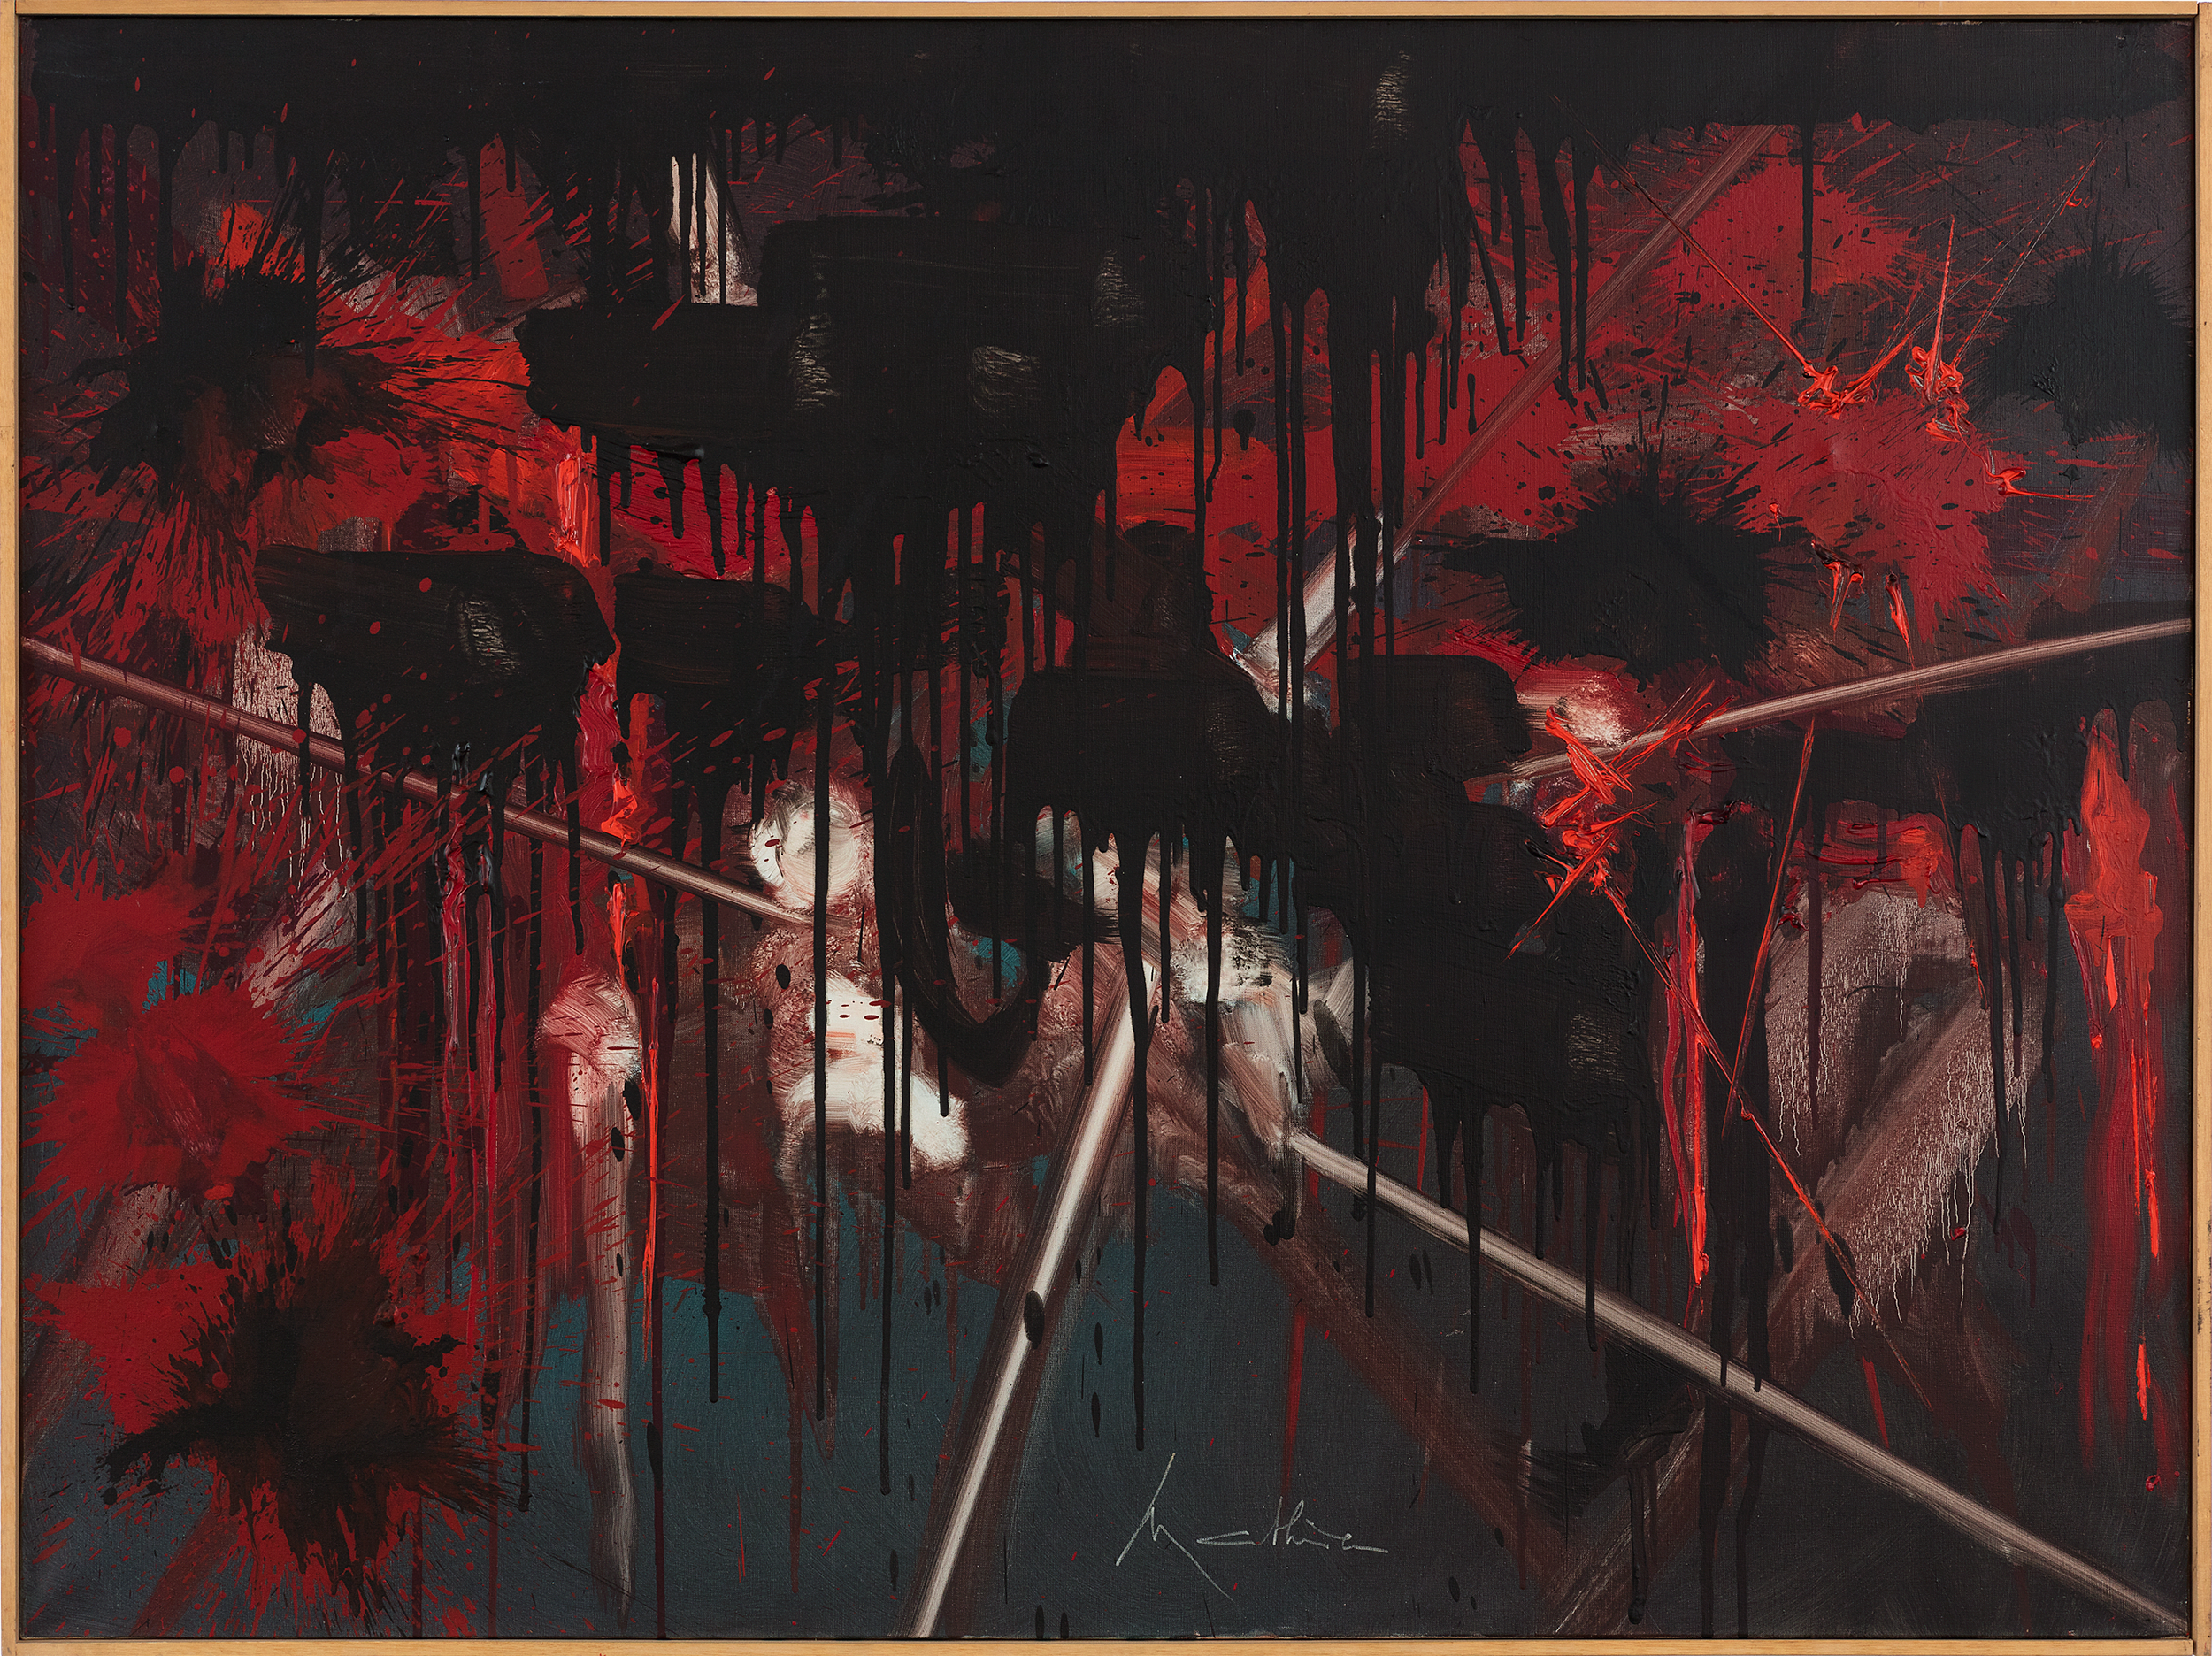 Georges Mathieu Flayed Plains, 1990, Oil on canvas, Edition Unique, 97.0 x 130.0 (cm) - 38.2 x 51.2 (inch), USD 400,001 - 500,000 @ Perrotin